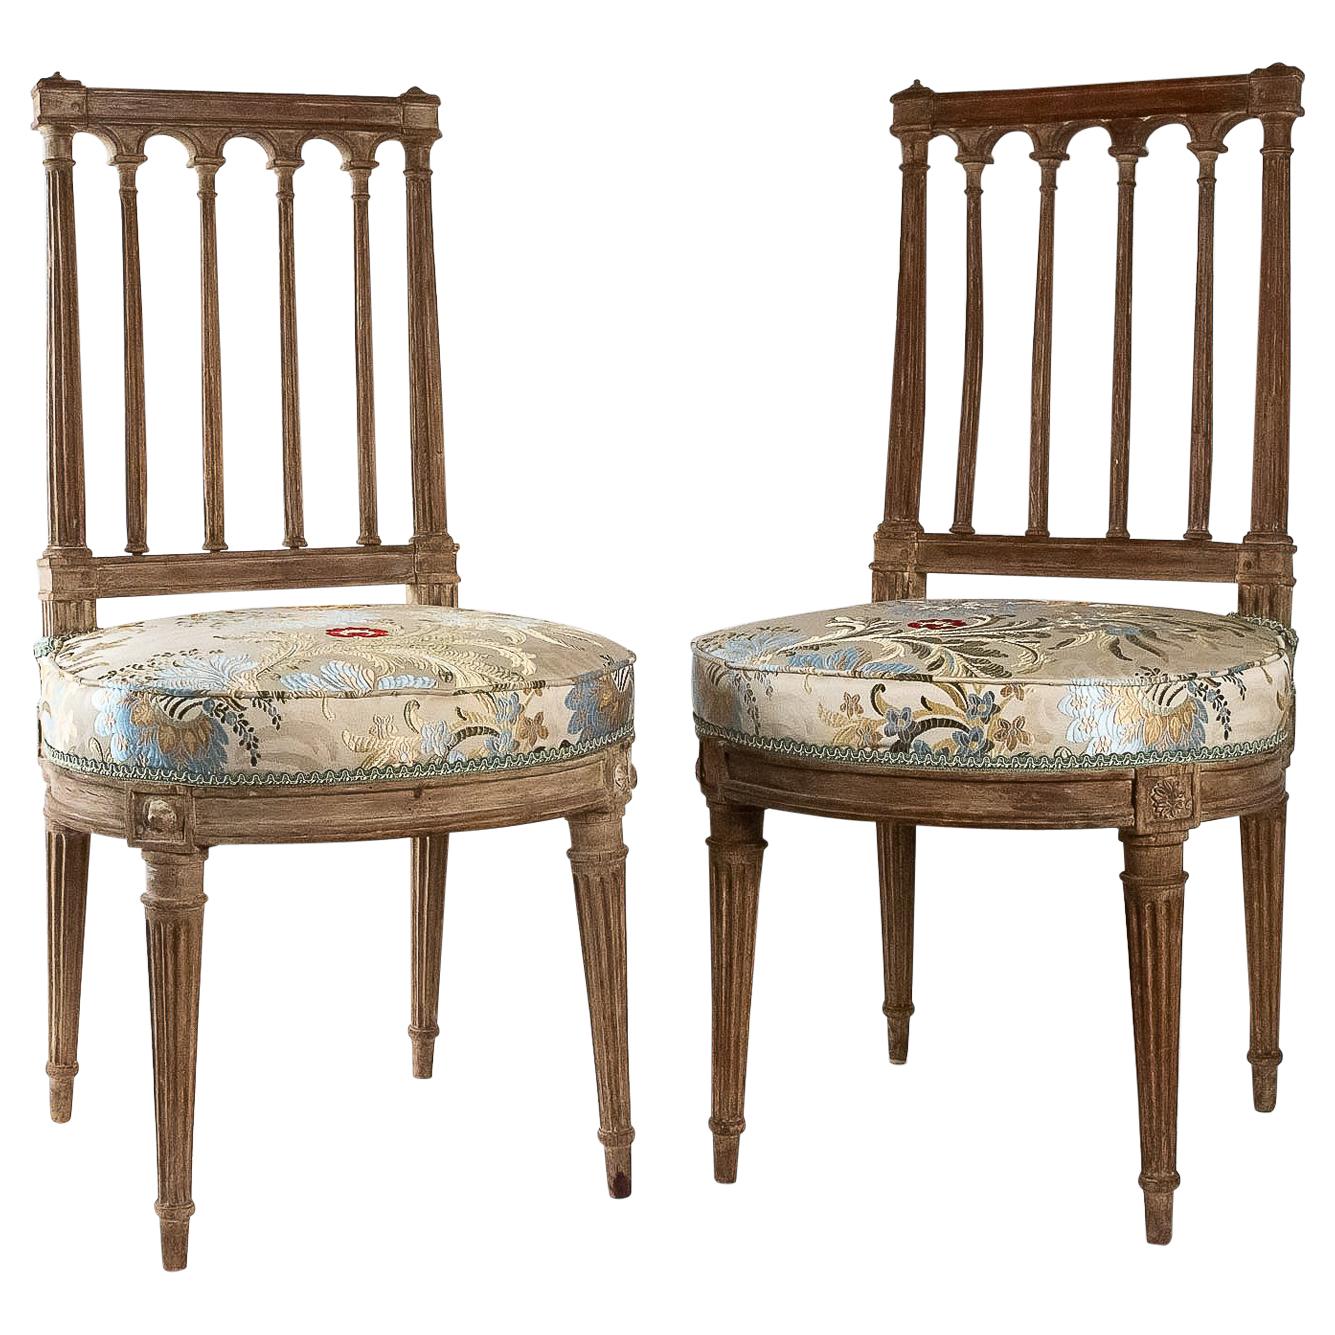 French Louis XVI Period, Pair of Chairs in Lacquered Beechwood, circa 1780